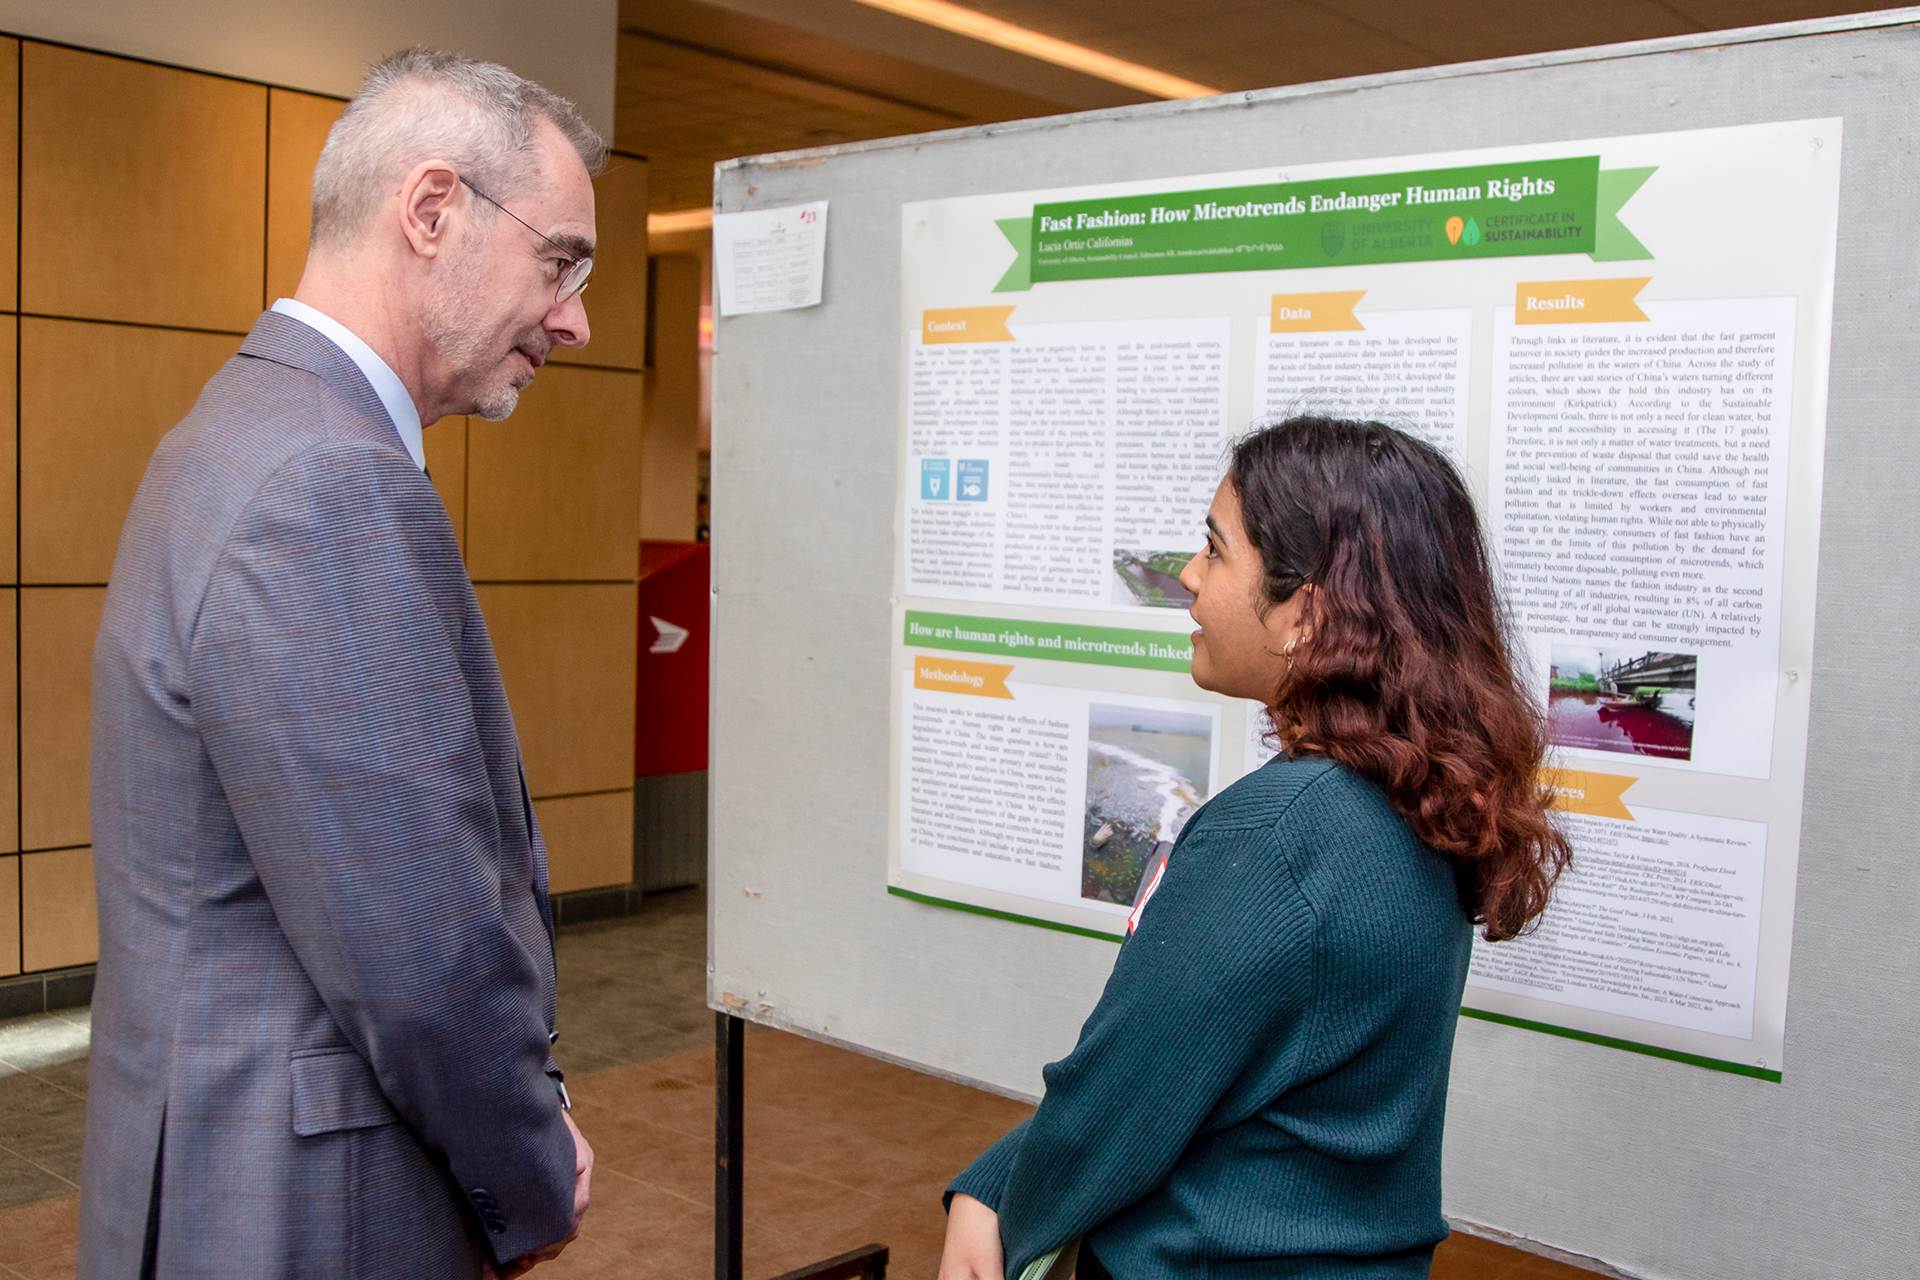 Submit your abstracts for Festival of Undergraduate Research and Creative Activities (FURCA)